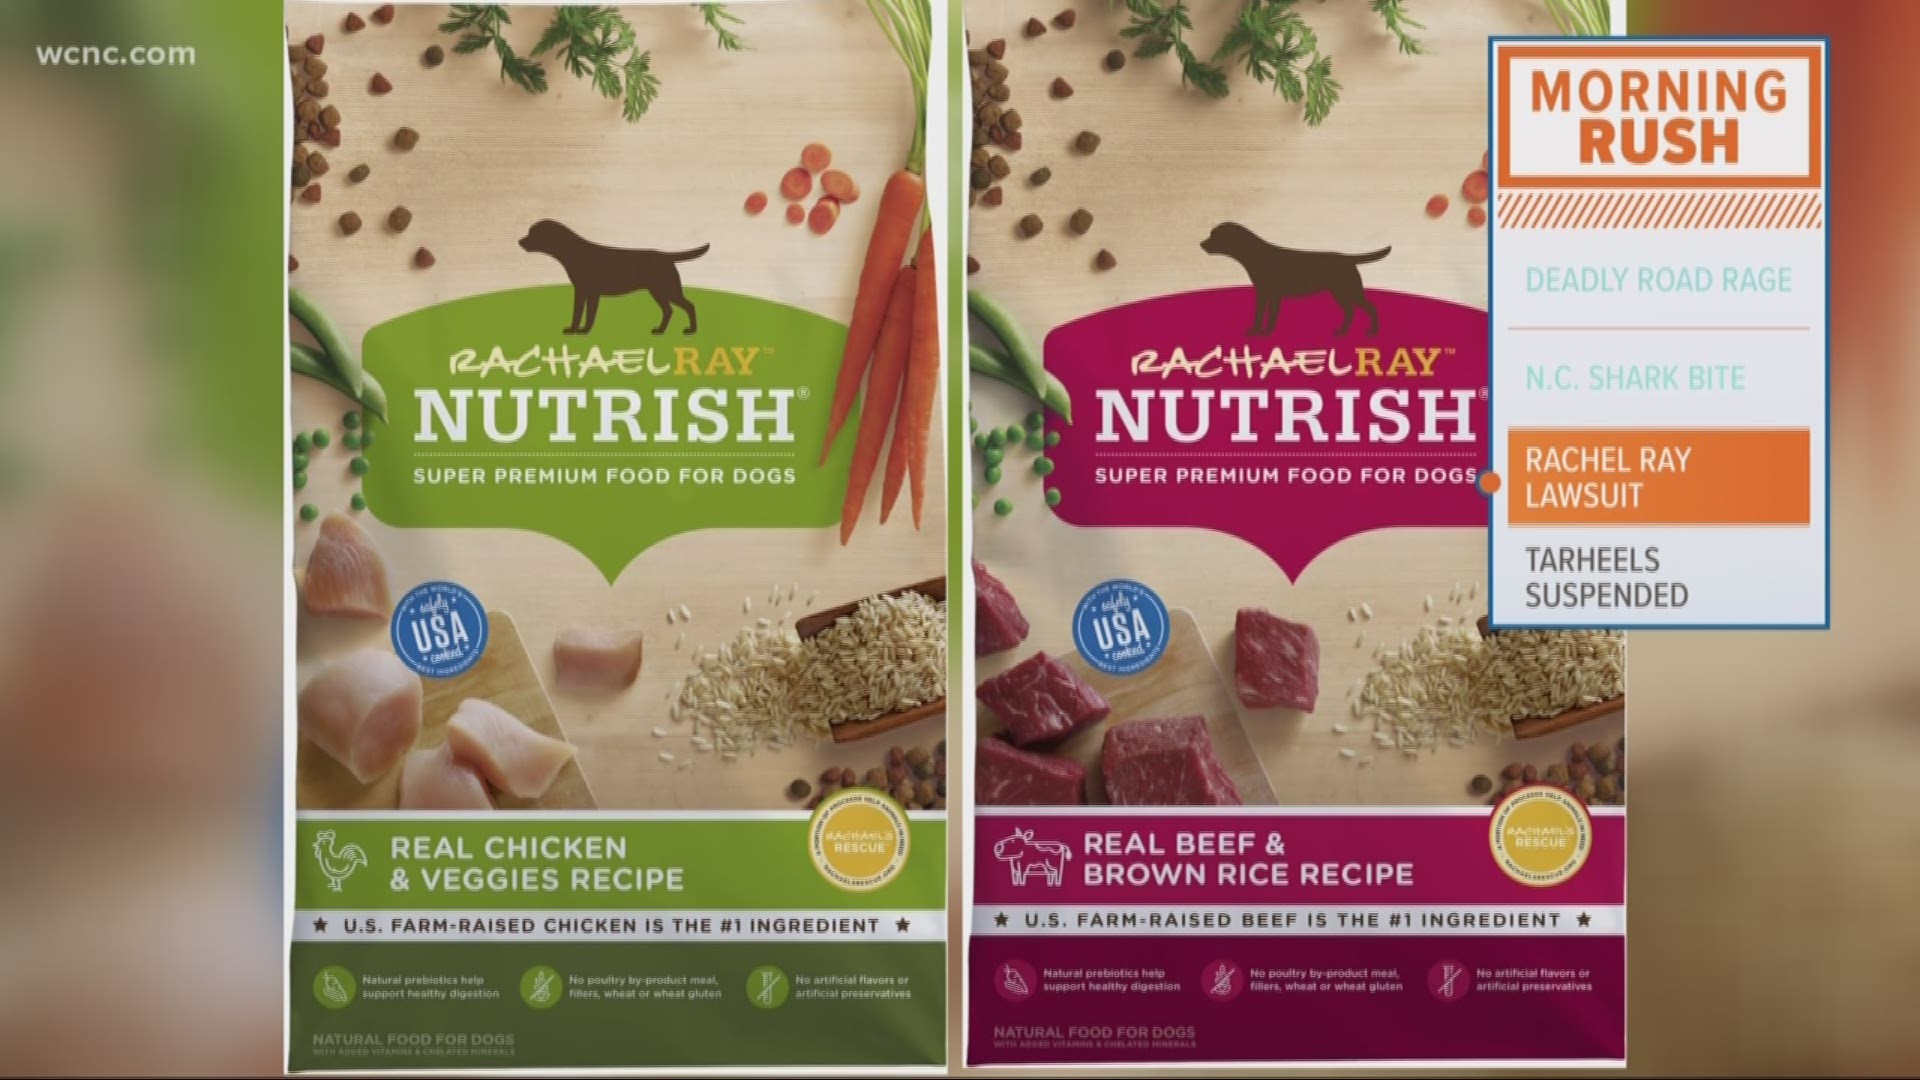 Rachael Ray sued over dog food ingredients